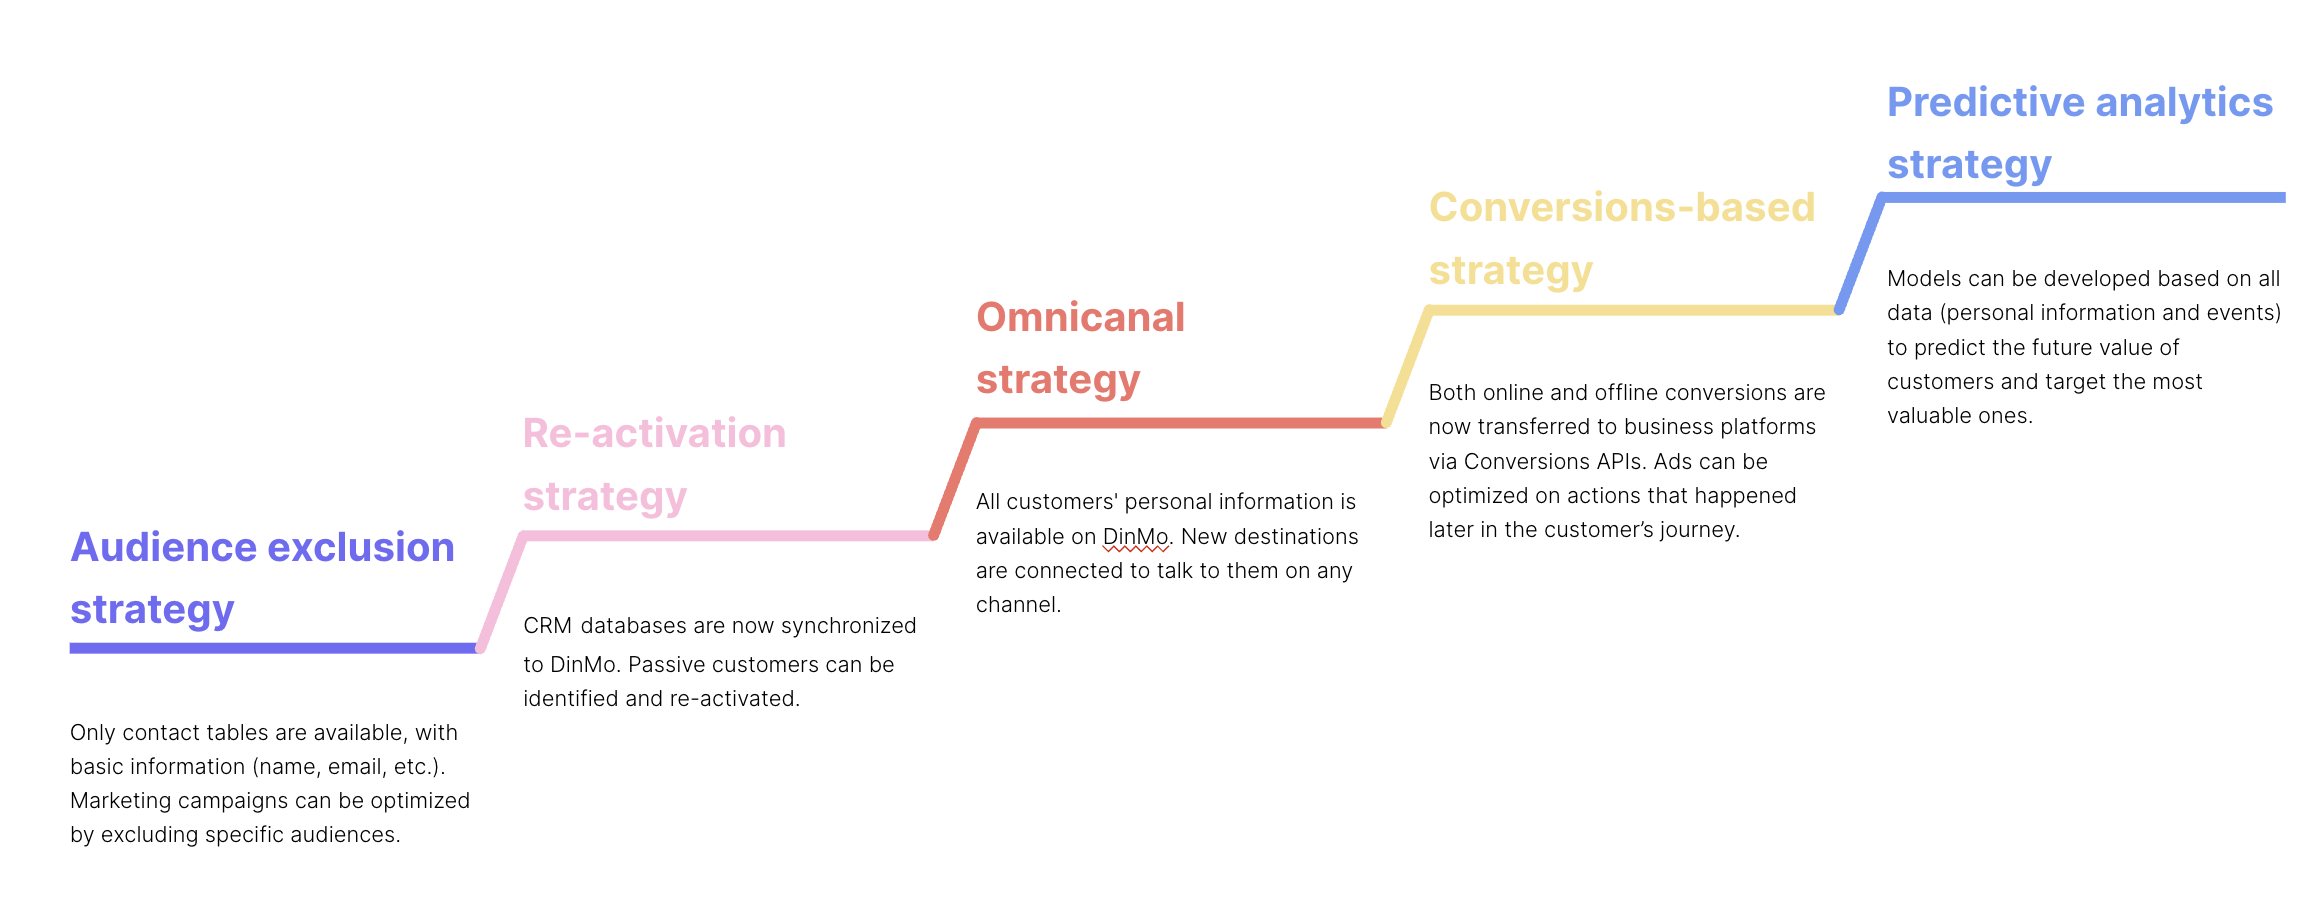 By using a Composable CDP, you can adapt a modular approach that fits to your needs: start small (audiences strategies) and go deeper (re-activation, omni channel strategies, conversions, predictions, etc.)